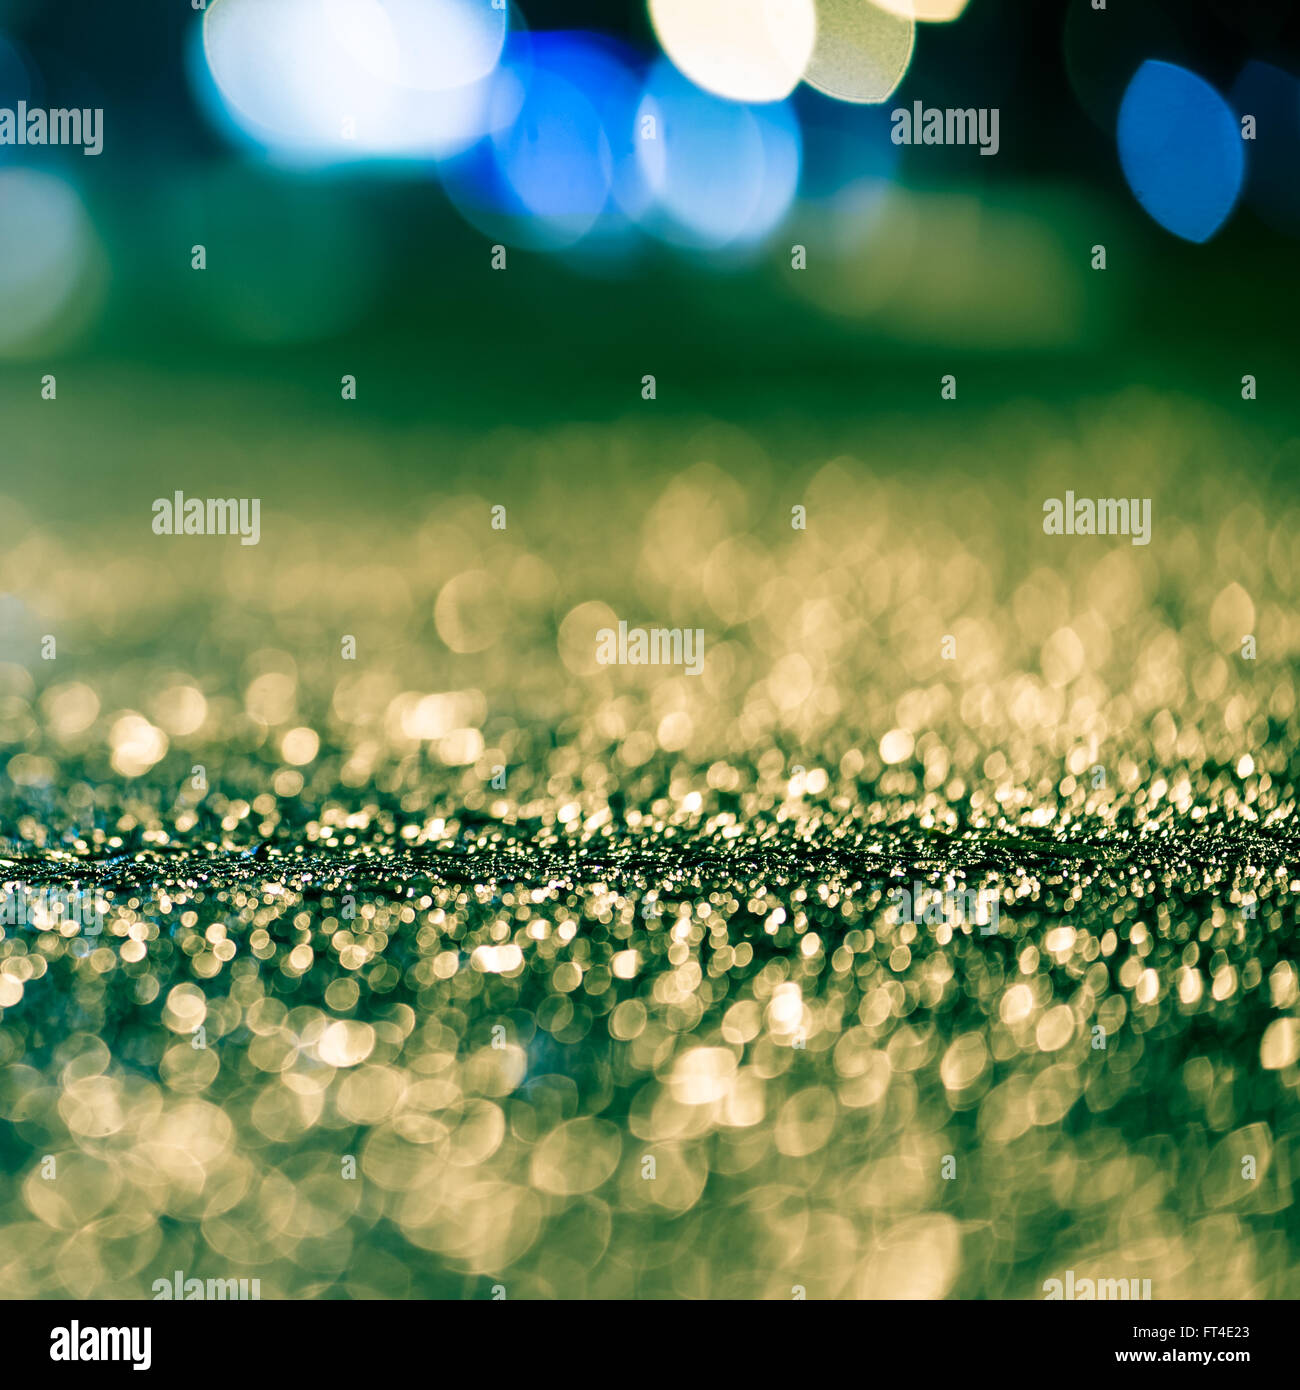 Abstract colorful blurry bokeh background. Stock Photo